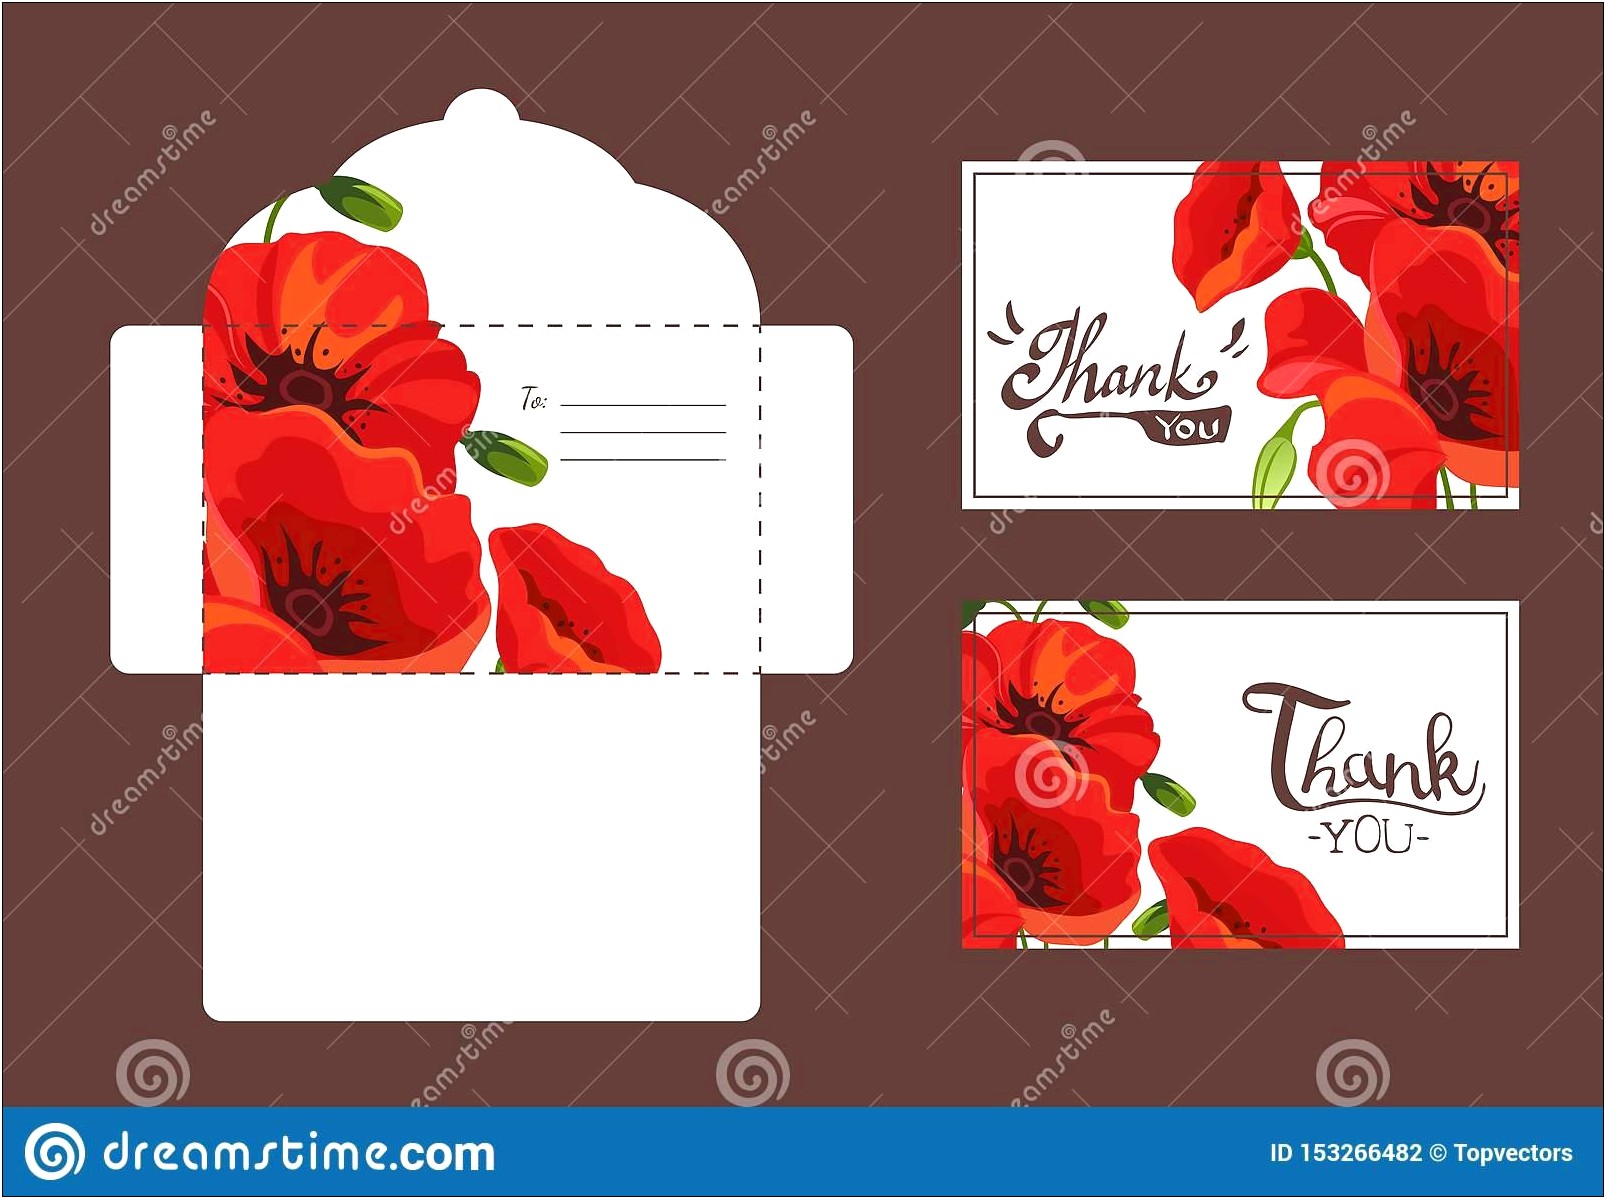 Free Save The Date Wedding Templates Email